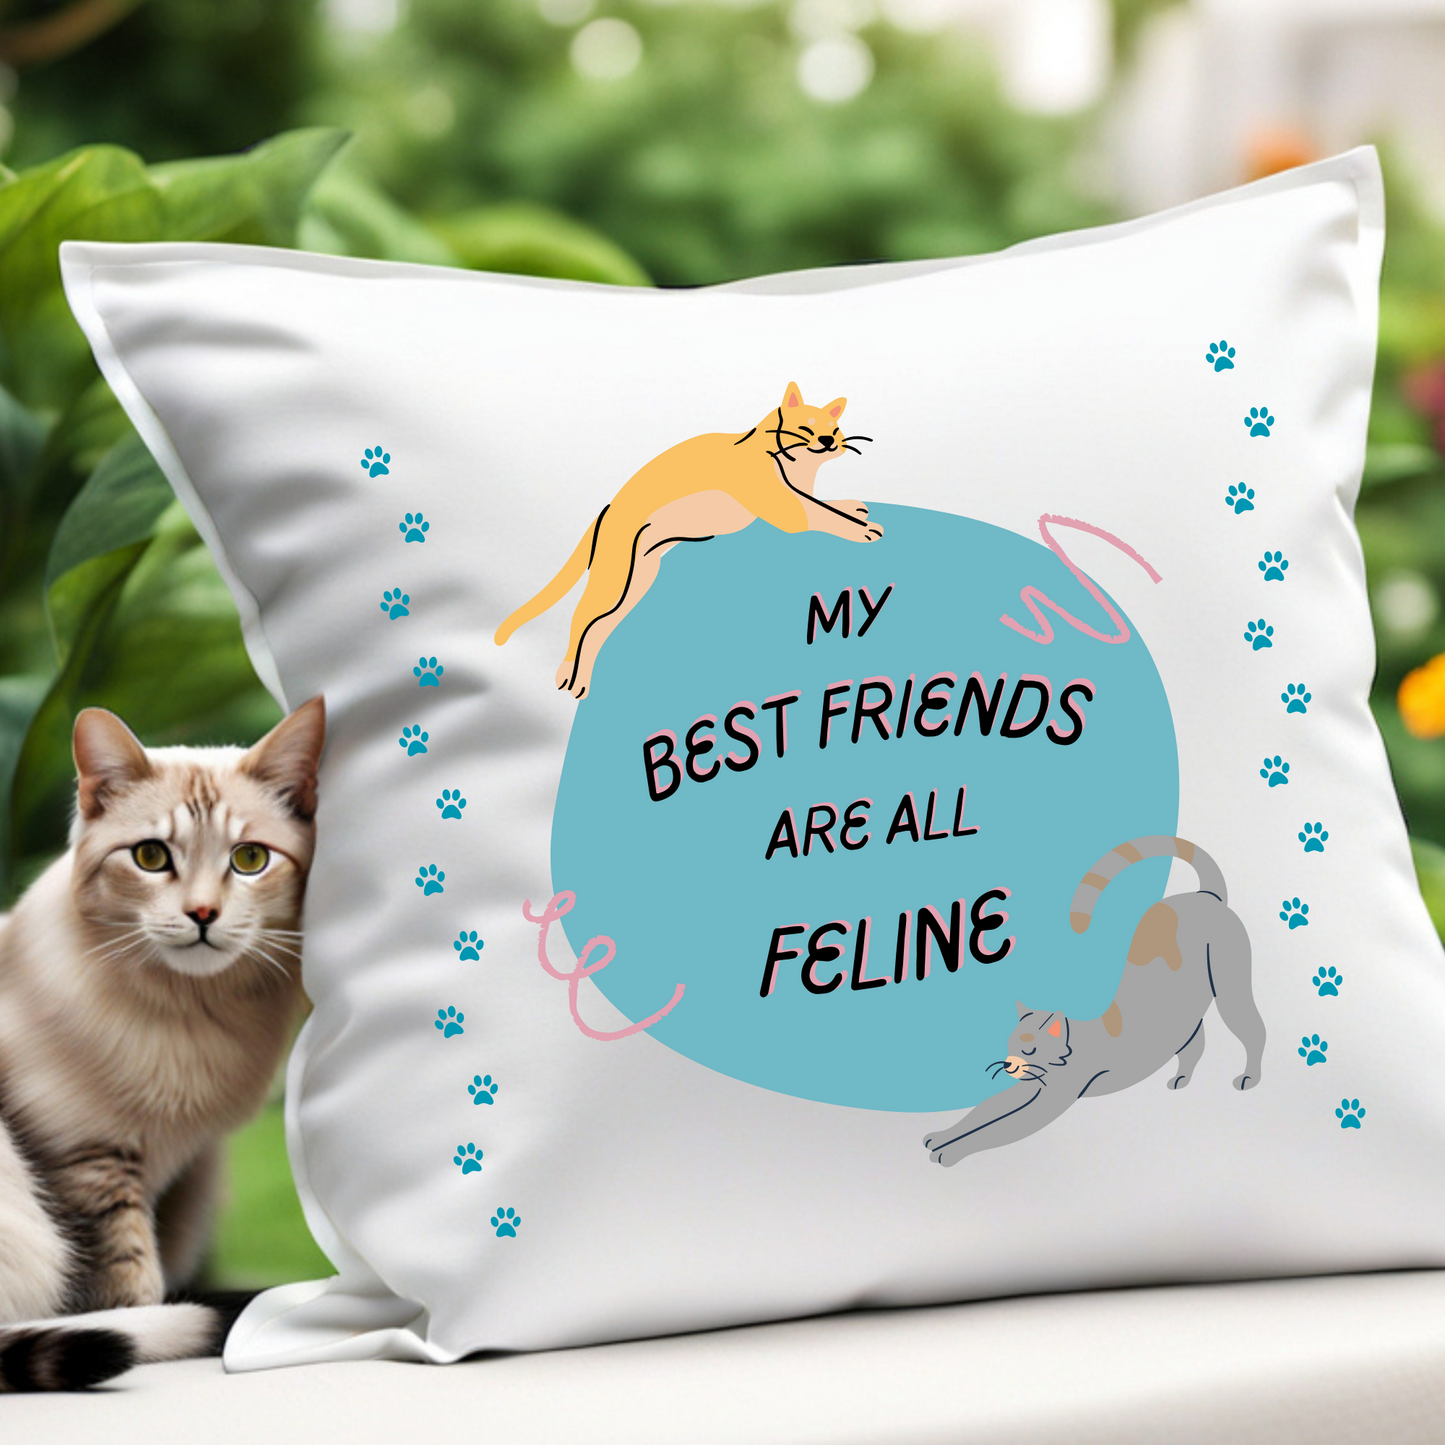 Canvas Cat Lady Tote–"My Best Friends Are All Feline" Slogan